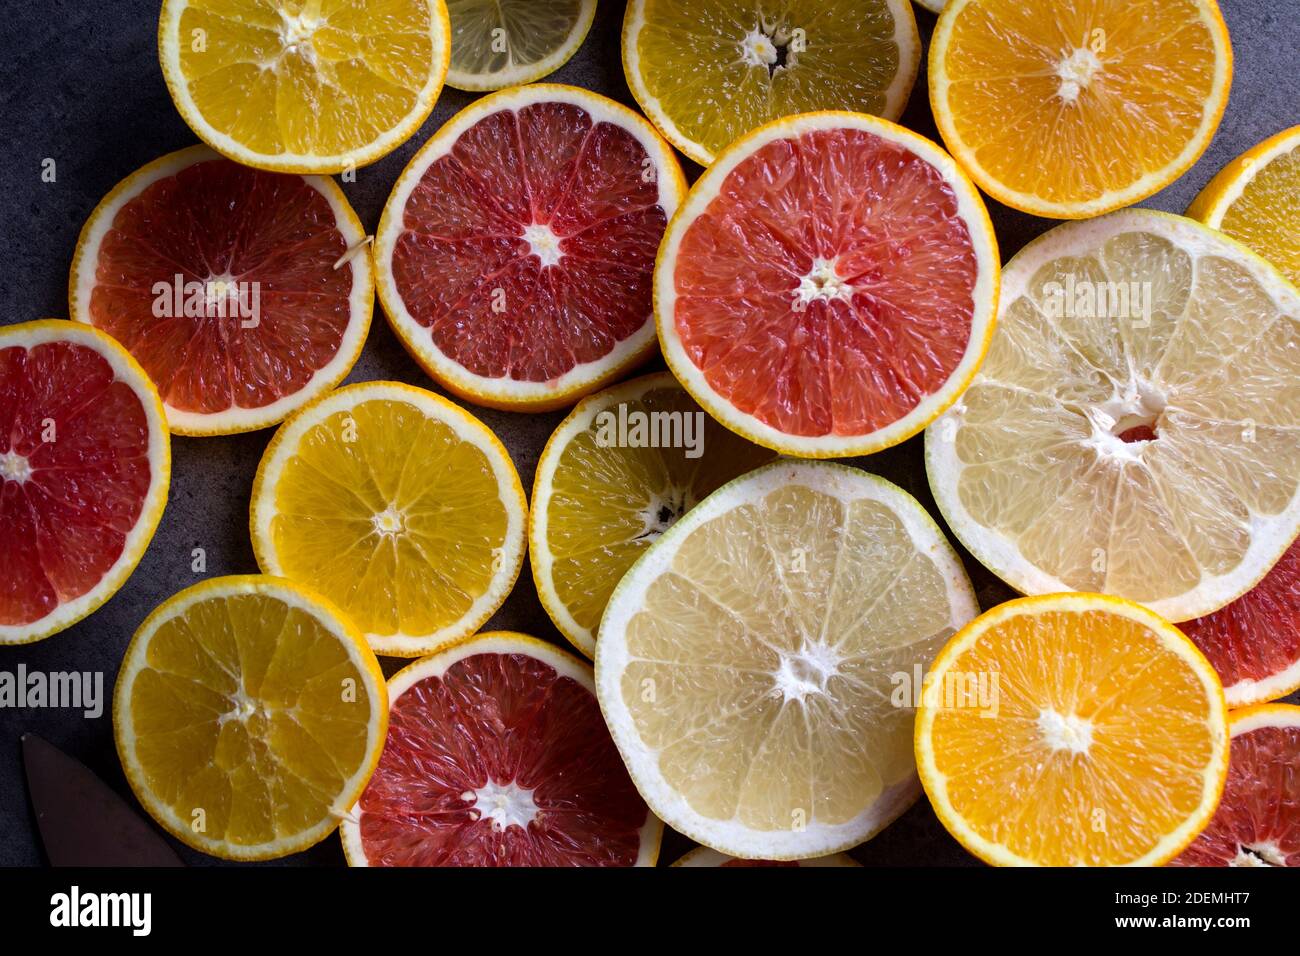 Red orange slices on a table. Fruit texture close up photo. Dark gray background with copy space. Stock Photo